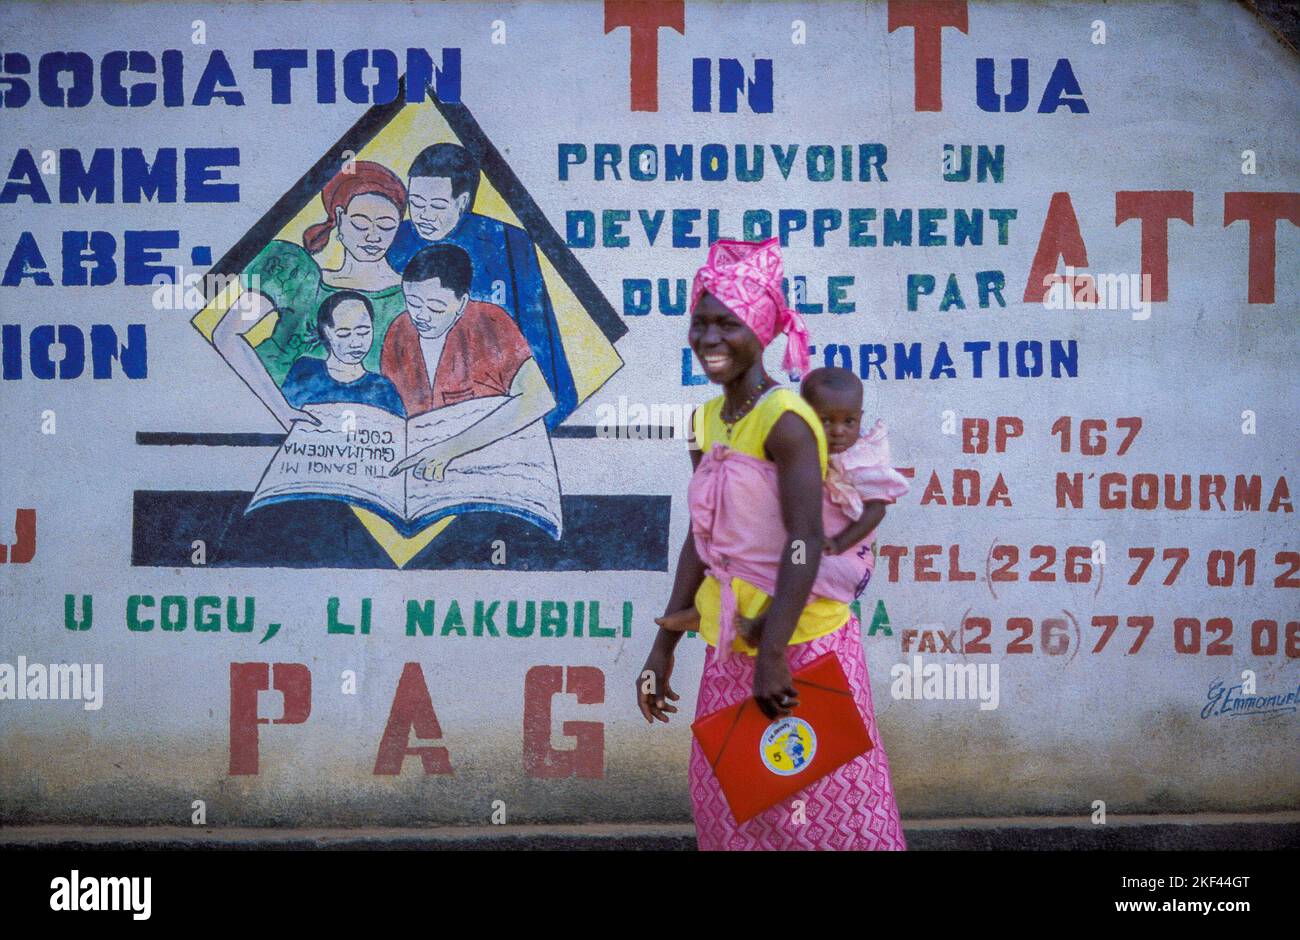 Burkina Faso, Fada N'Gourma. A mother with her child in front of a mural of Tin Tua, an organisation on rural development. Stock Photo